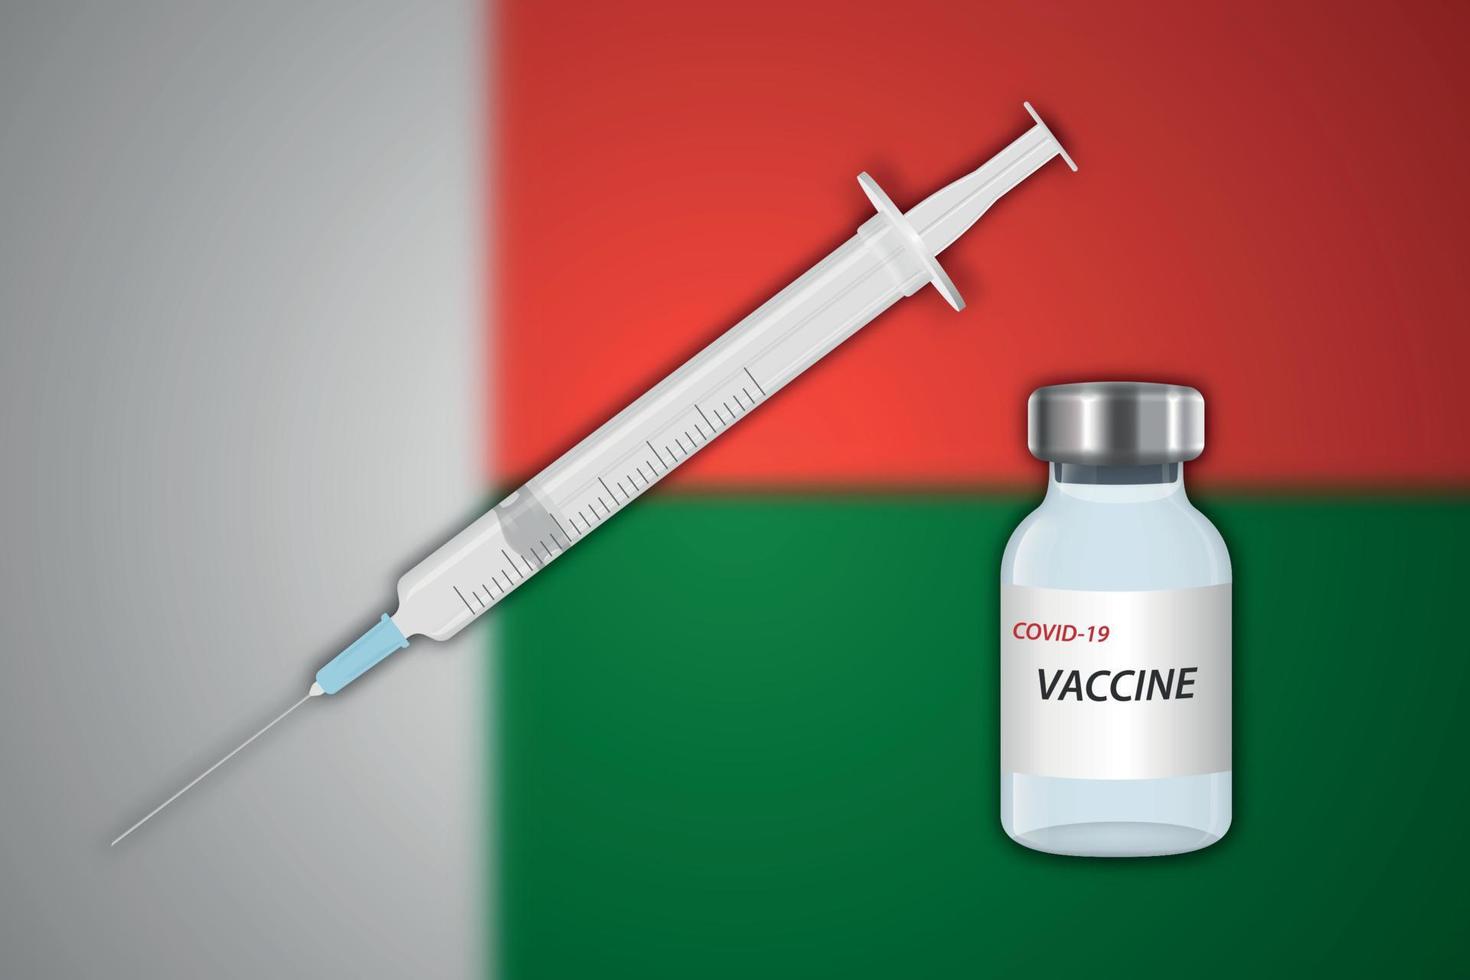 Syringe and vaccine vial on blur background with Madagascar flag vector